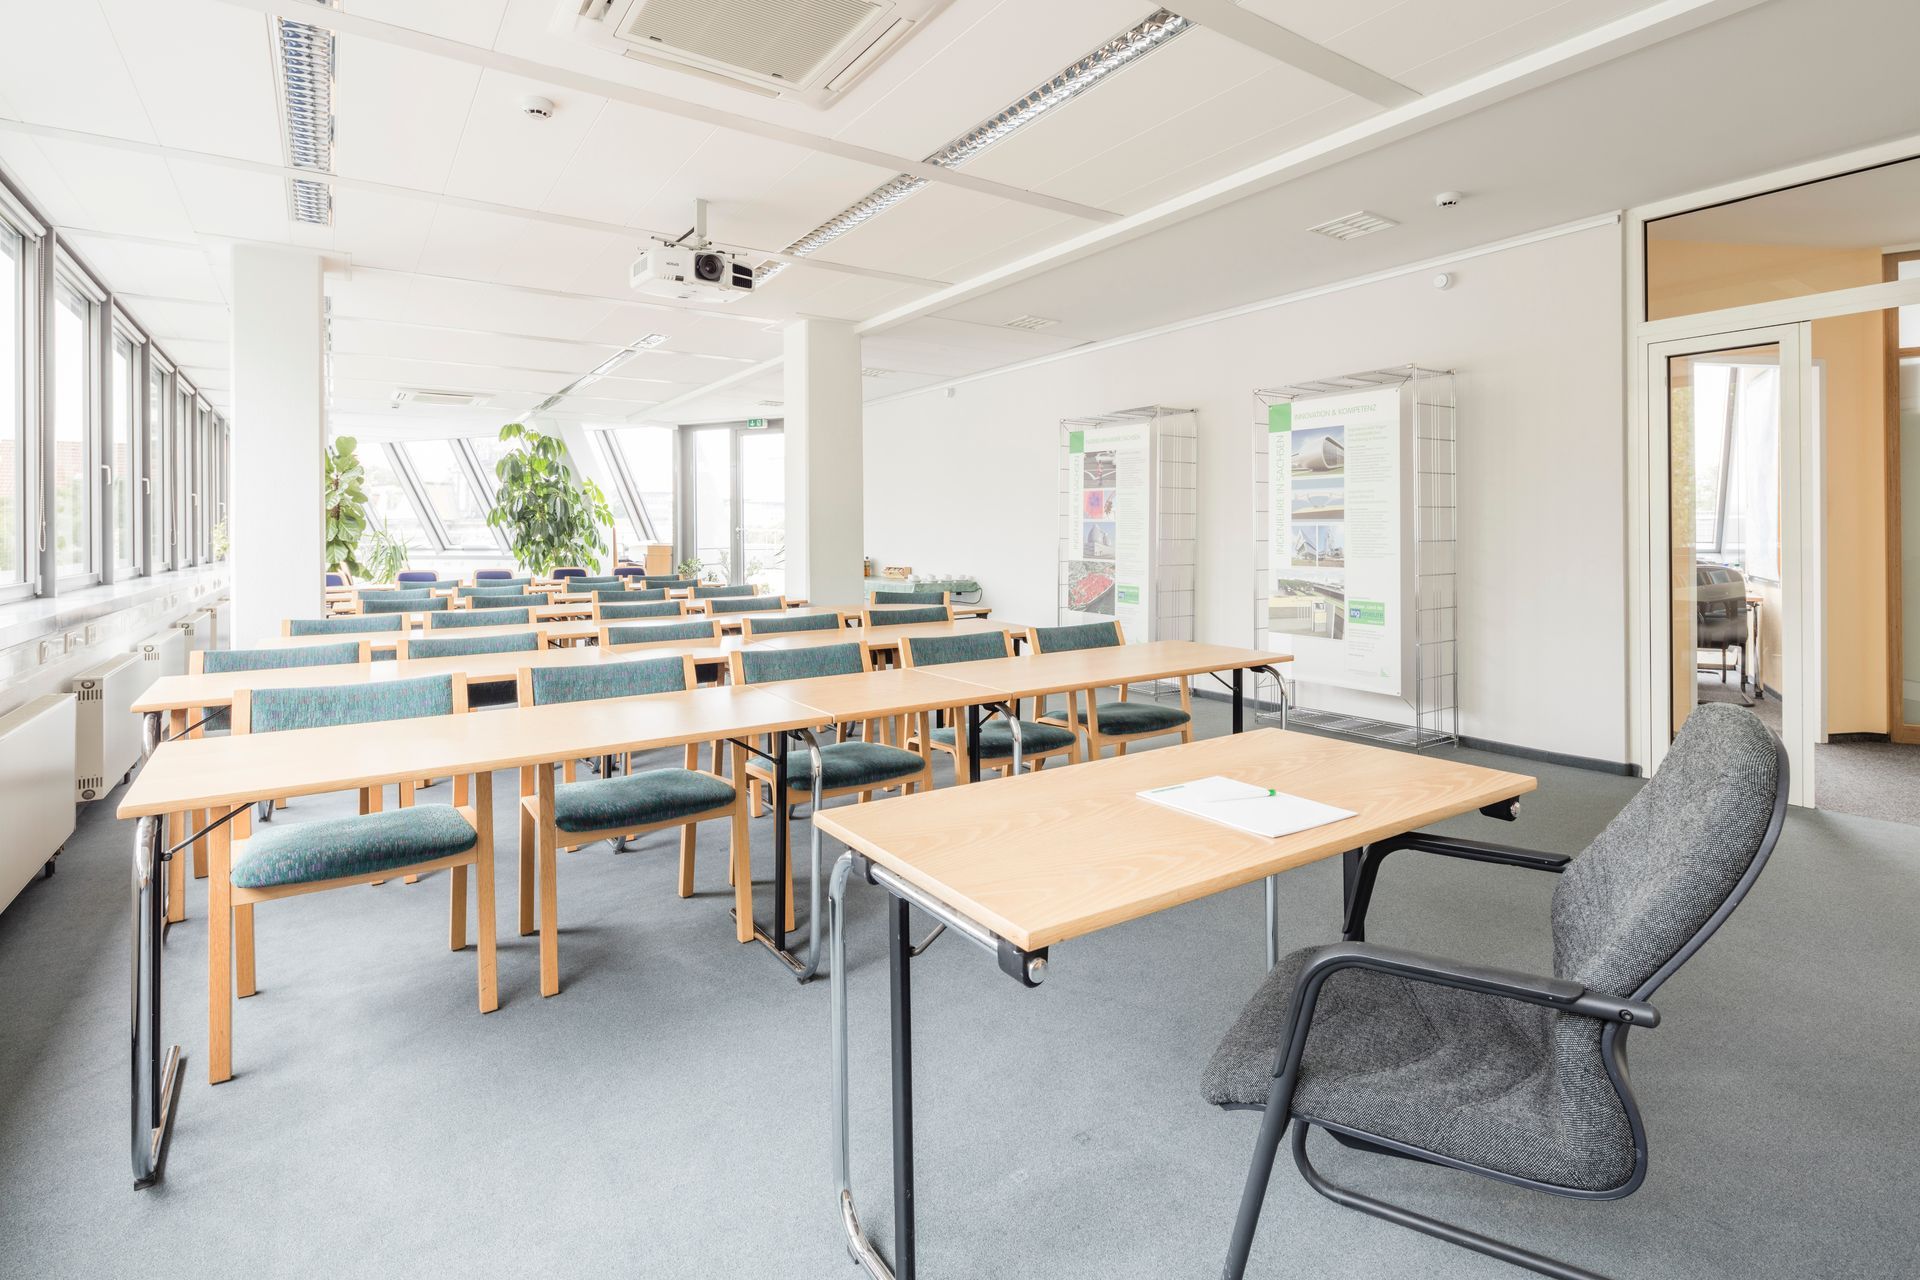 An image depicting the inside of a classroom at an international school in Korea